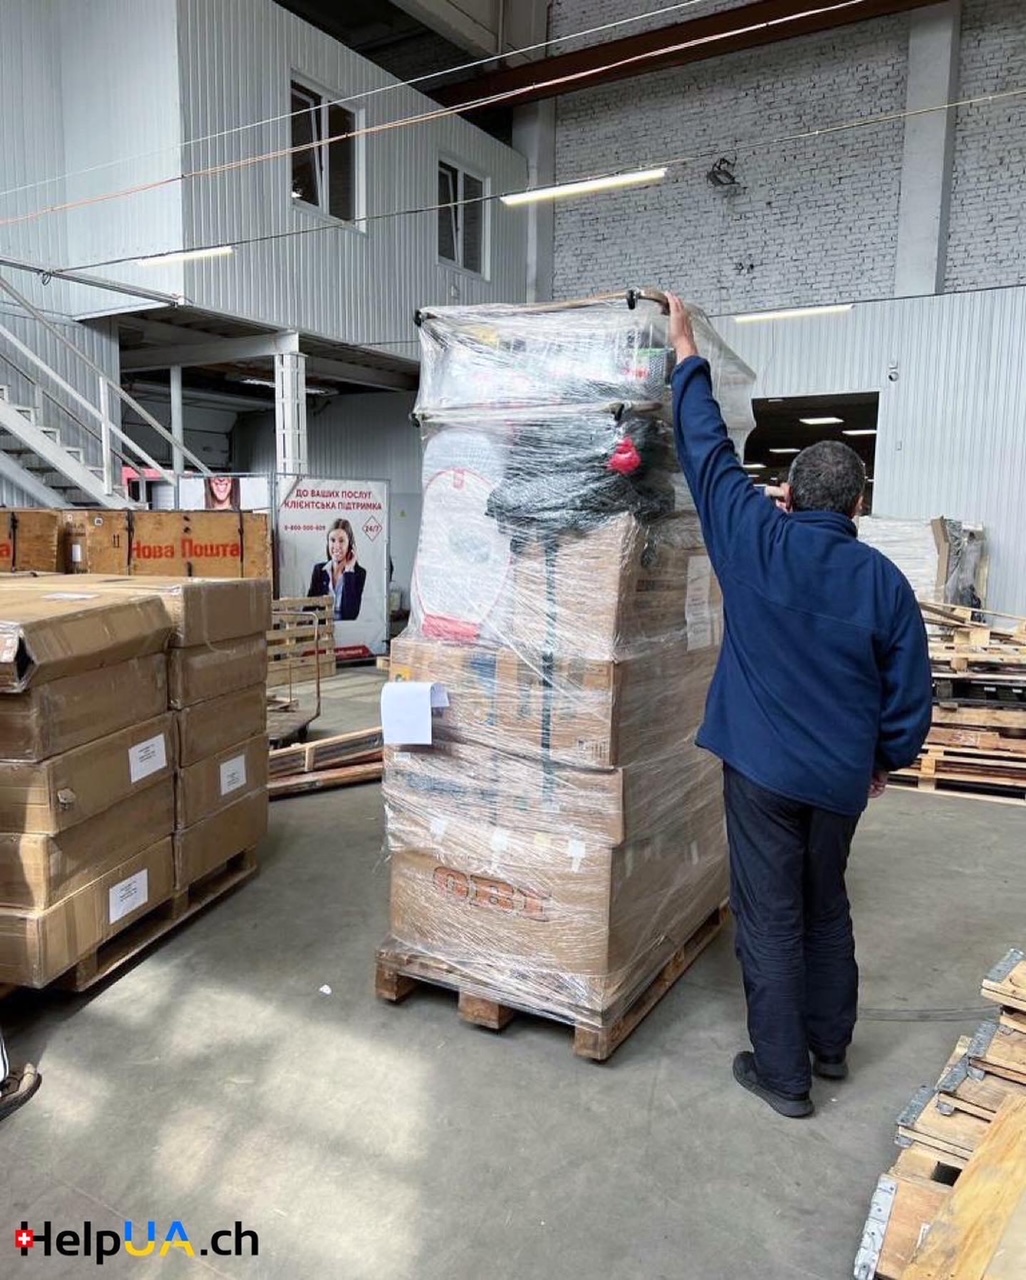 Volunteers from Cherkassy  are now receiving  humanitarian help shipped from Switzerland. We are grateful to @help_ukraine_center for logistics from Poland to Ukraine